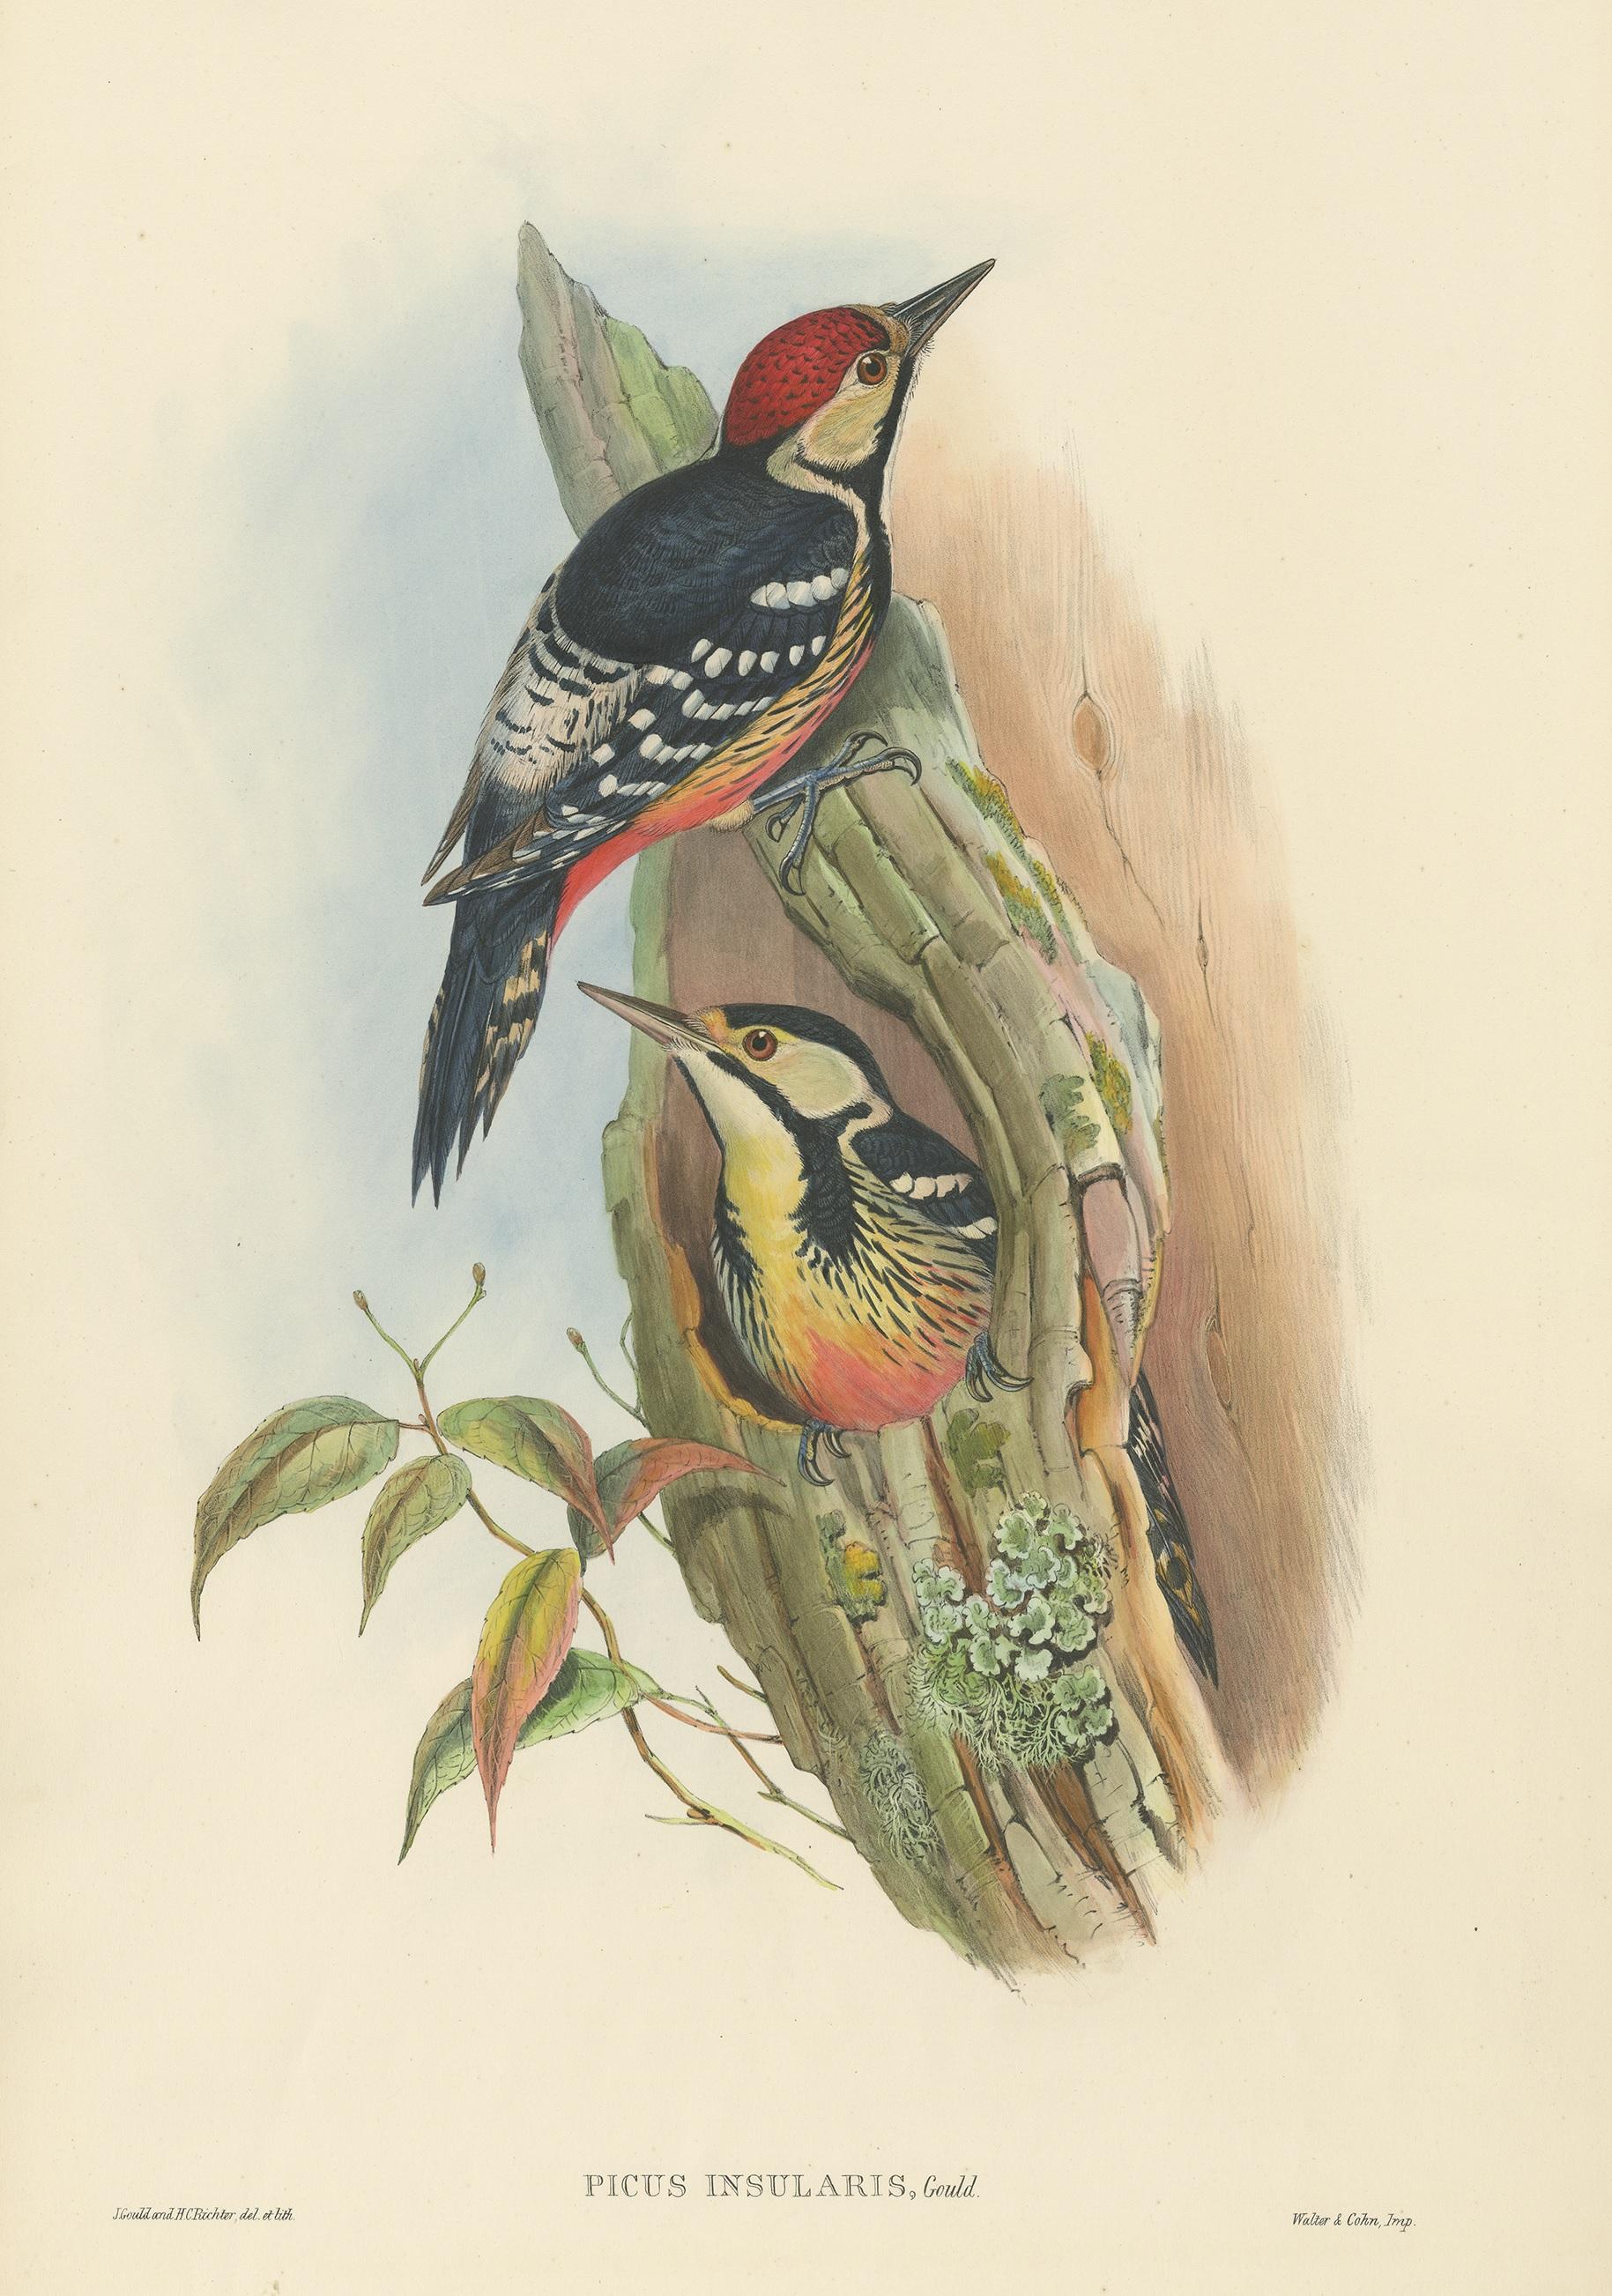 Antique bird print titled 'Picus Insularis'. Original lithograph of the Formosan Spotted Woodpecker. This print originates from 'Birds of Asia' by John Gould. Published 1850-1853.